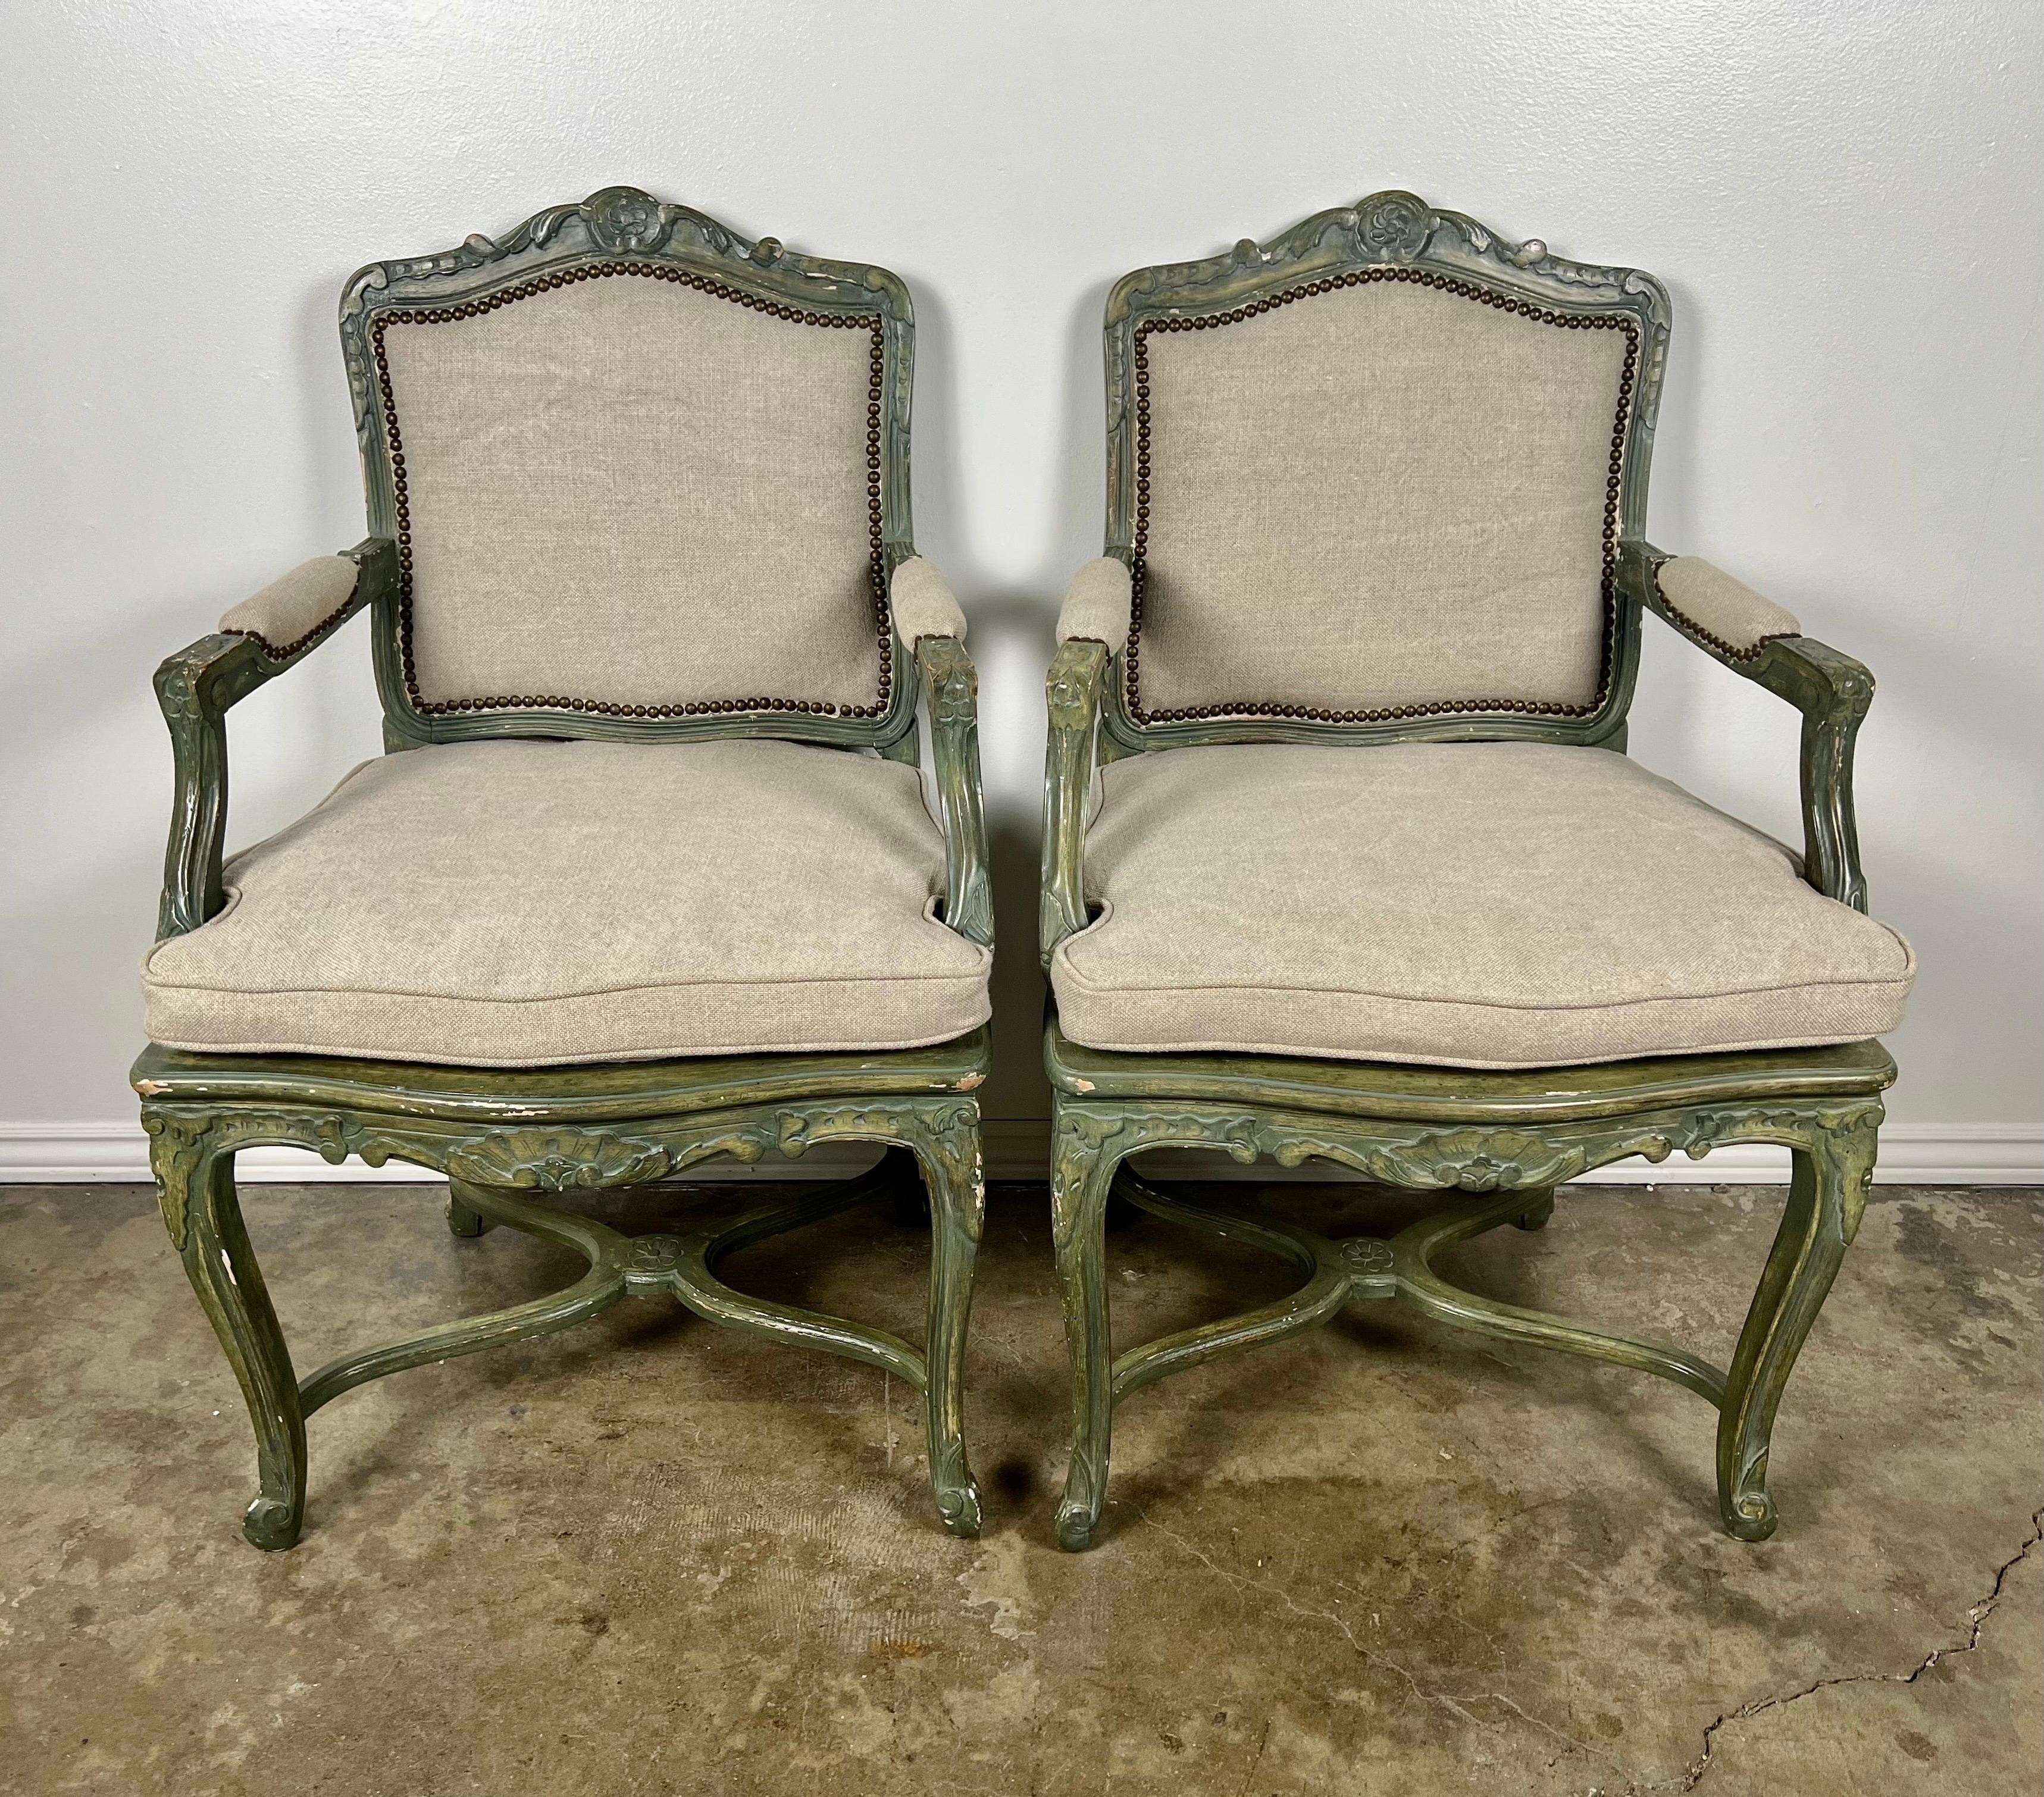 Pair of 19th century carved painted armchairs standing on four cabriole legs with rams head feet. Newly upholstered in a washed Belgium linen with nailhead trim detail. Loose cushions with original cane underneath.p